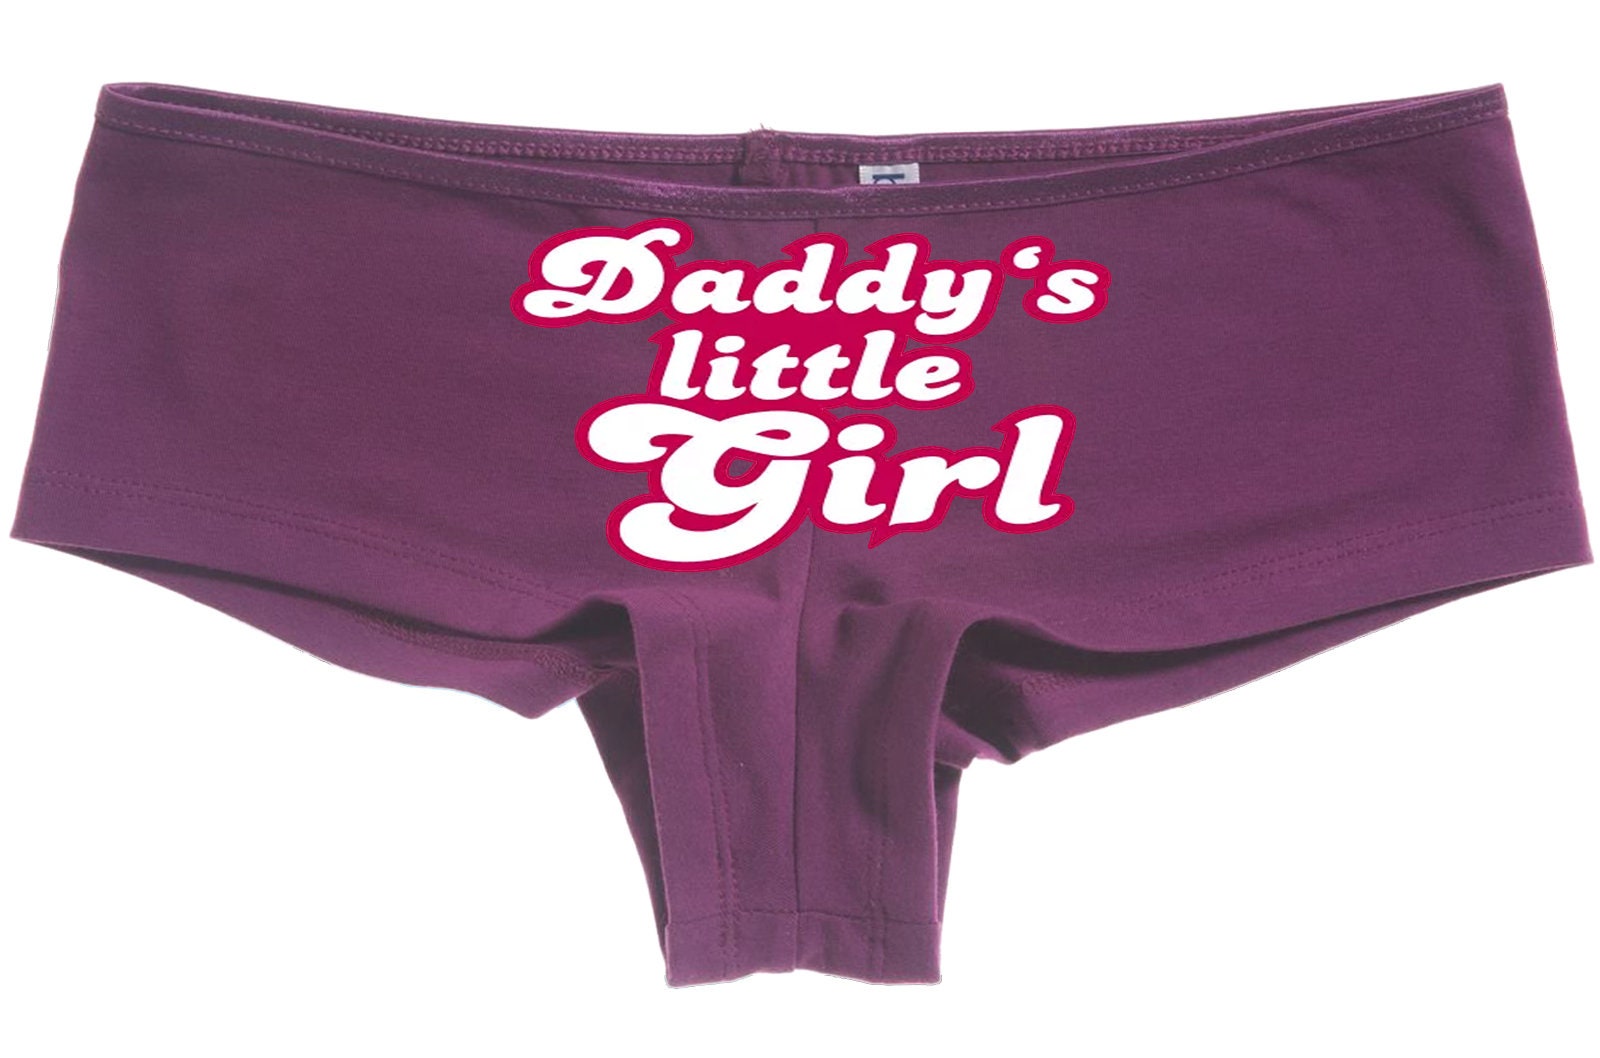 DADDYS LITTLE GIRL 2 Ddlg Clothing Owned Slave Boy Short P